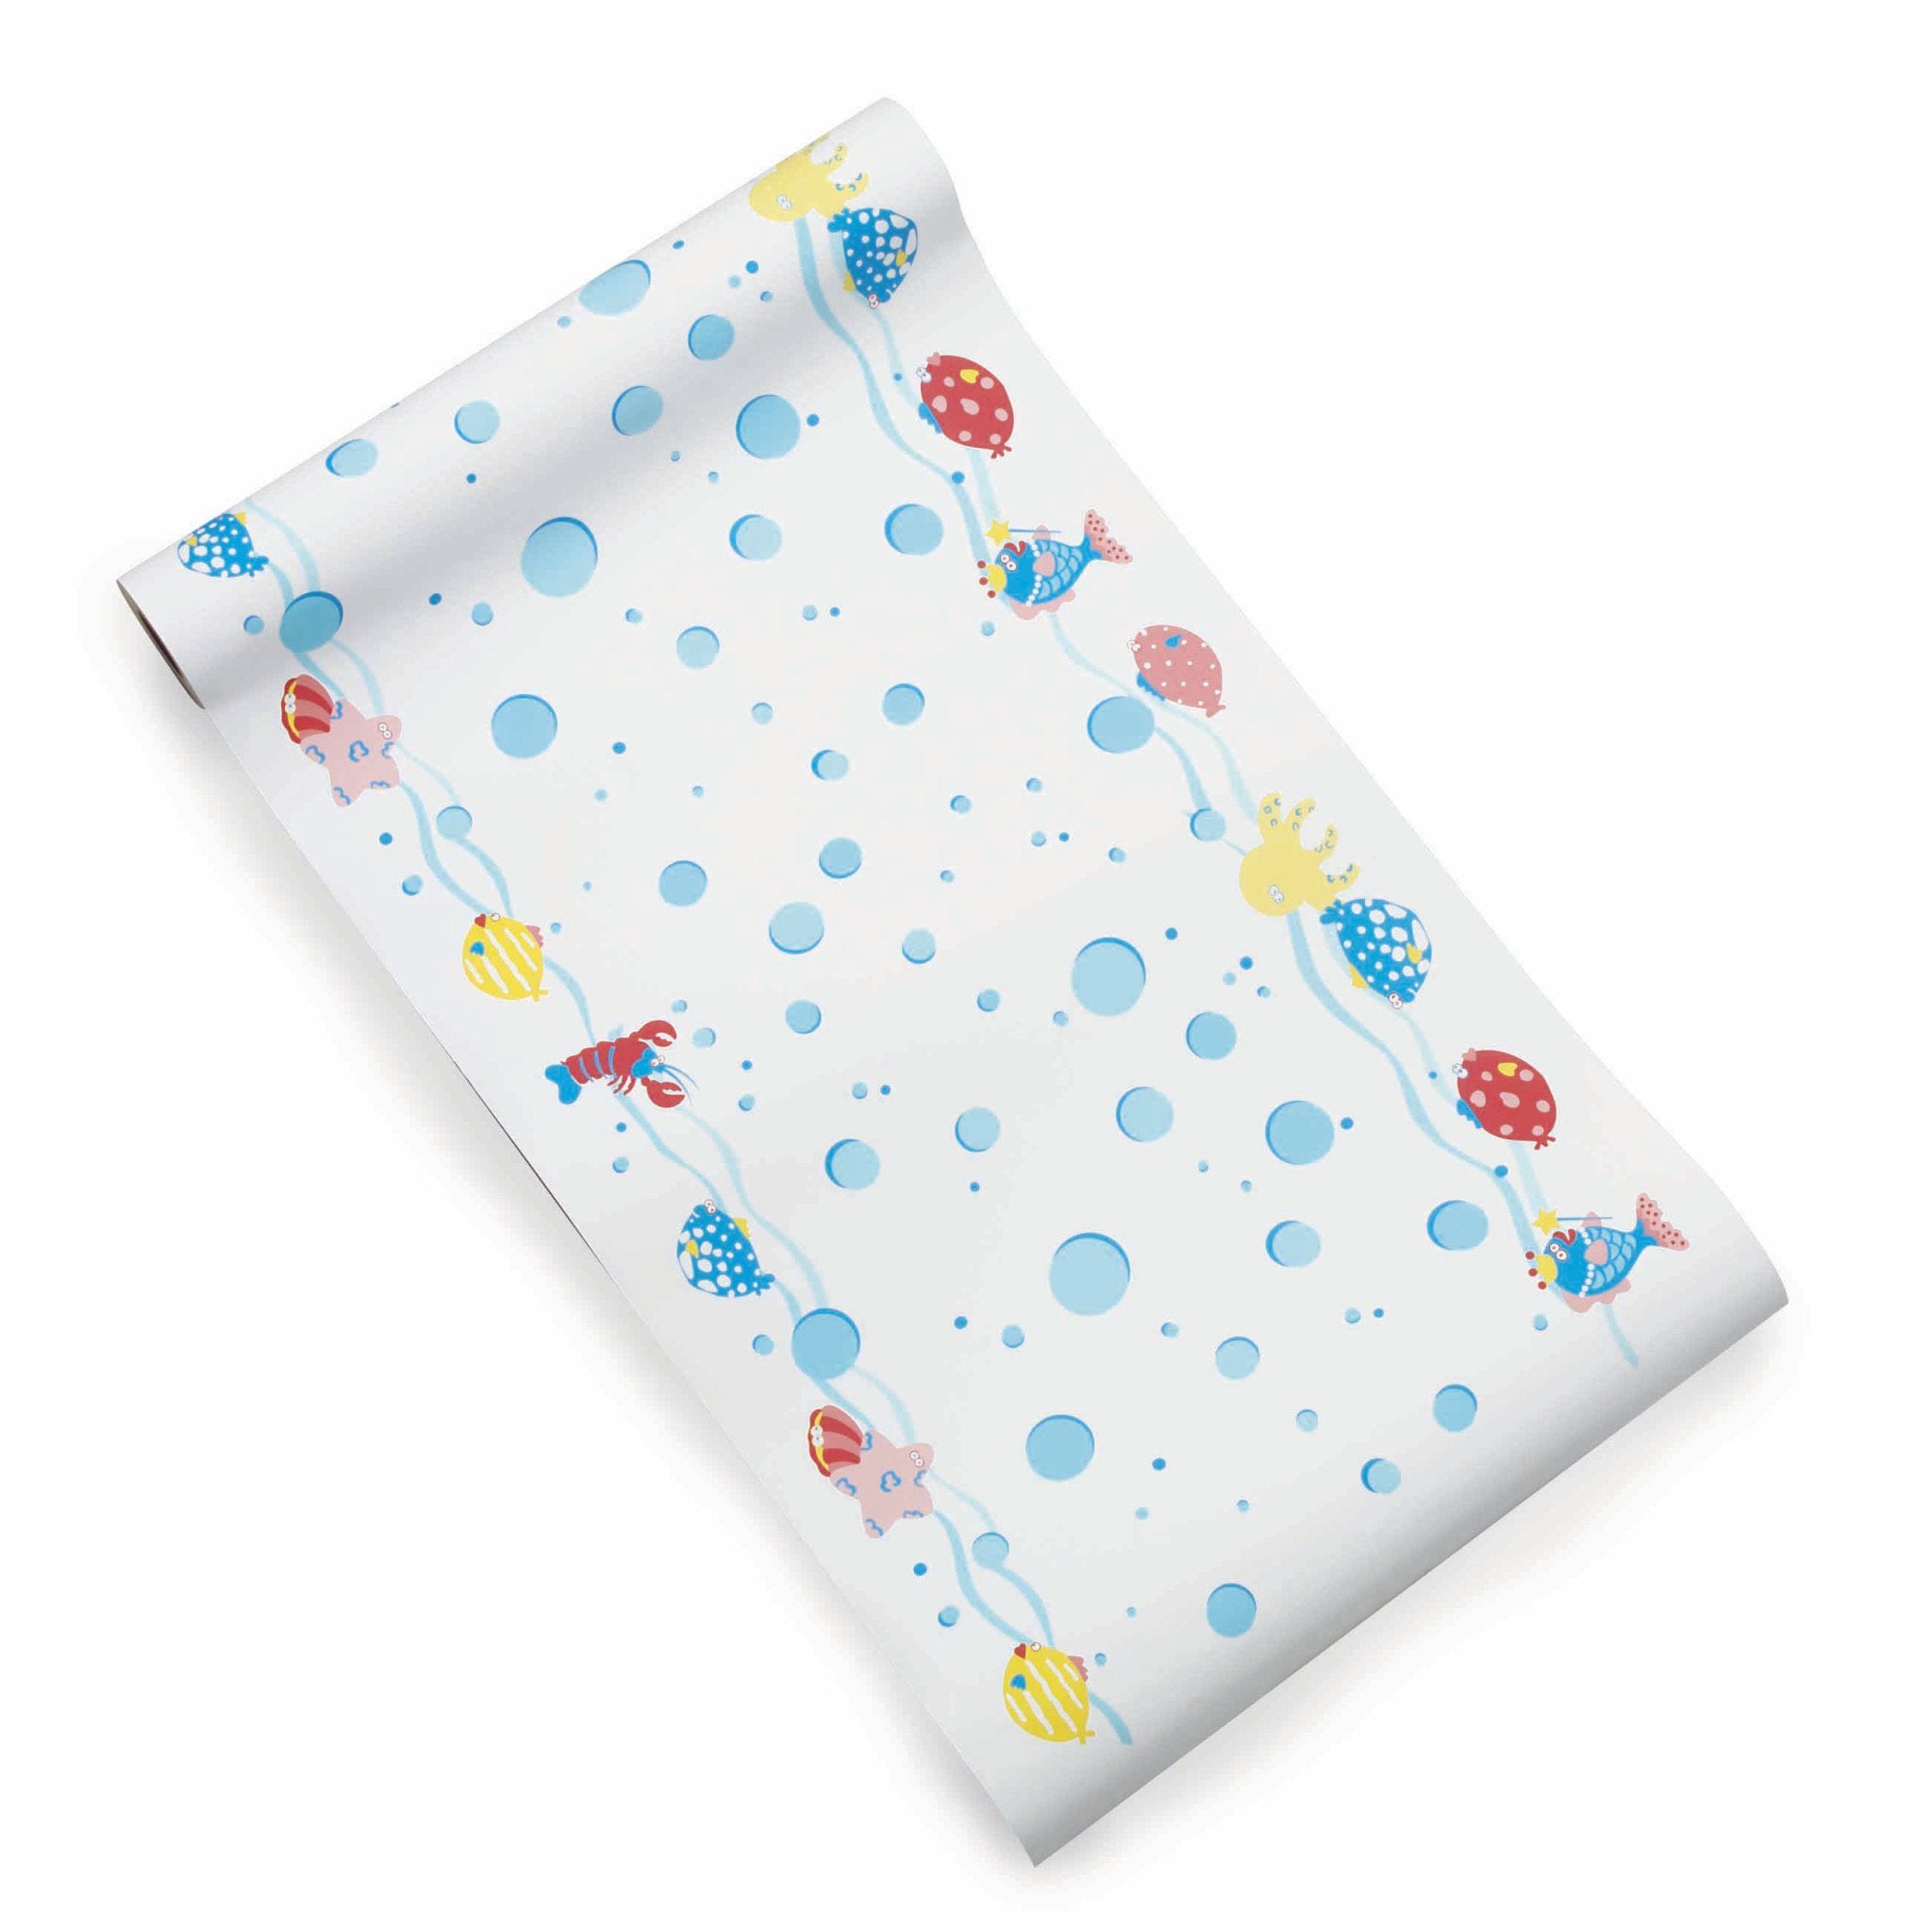 Table Paper McKesson 18 Inch Width Print (Under the Sea) Smooth